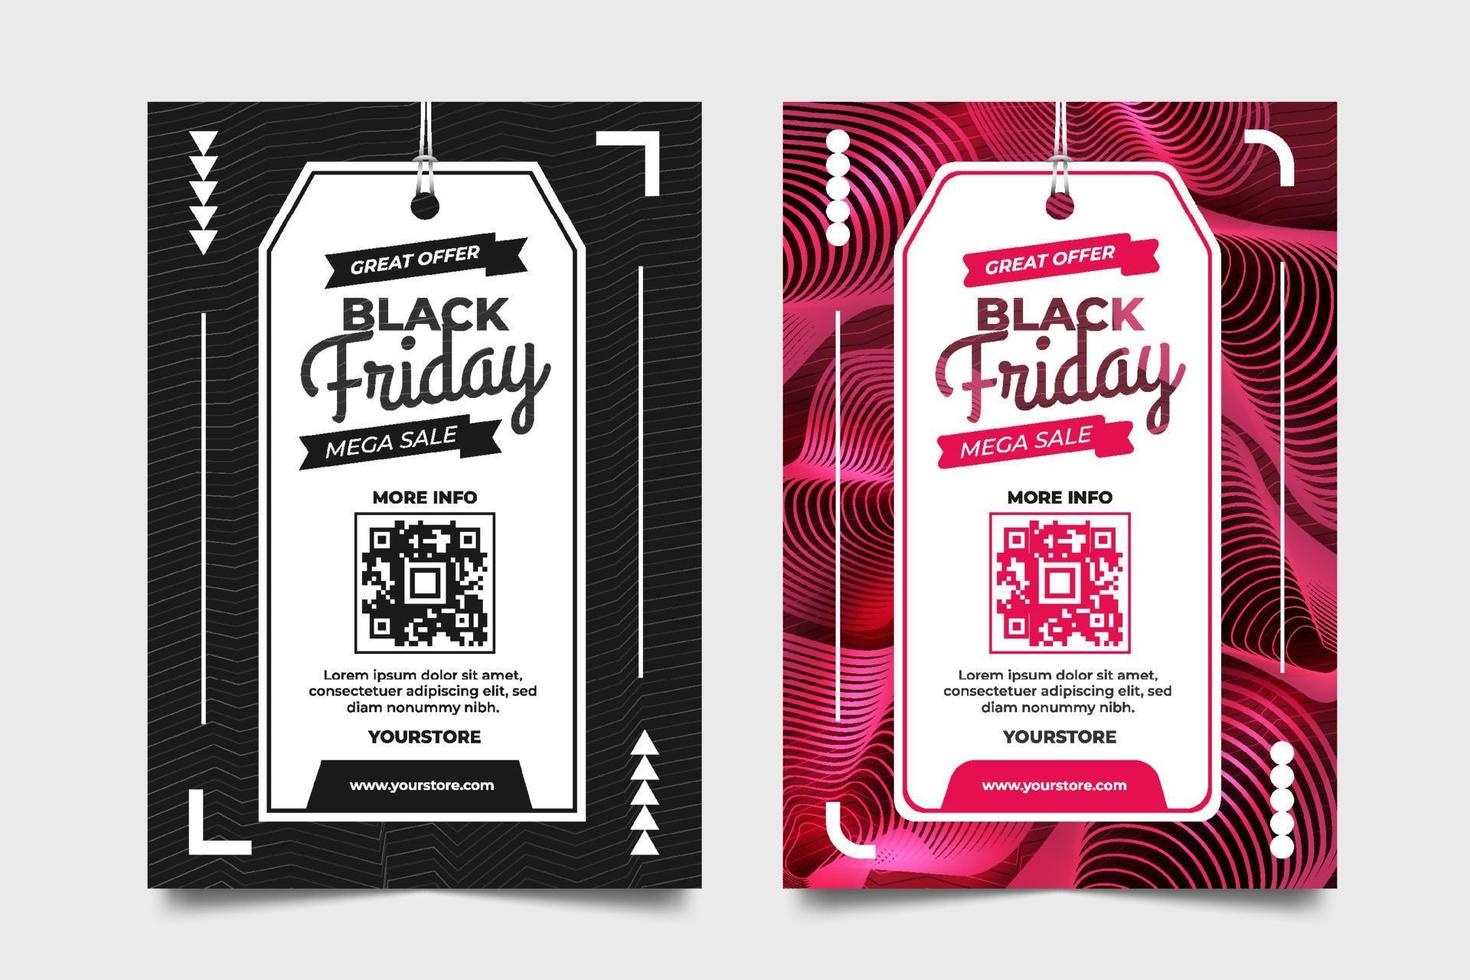 Black Friday Mega Sale Abstract Flyer Template vector